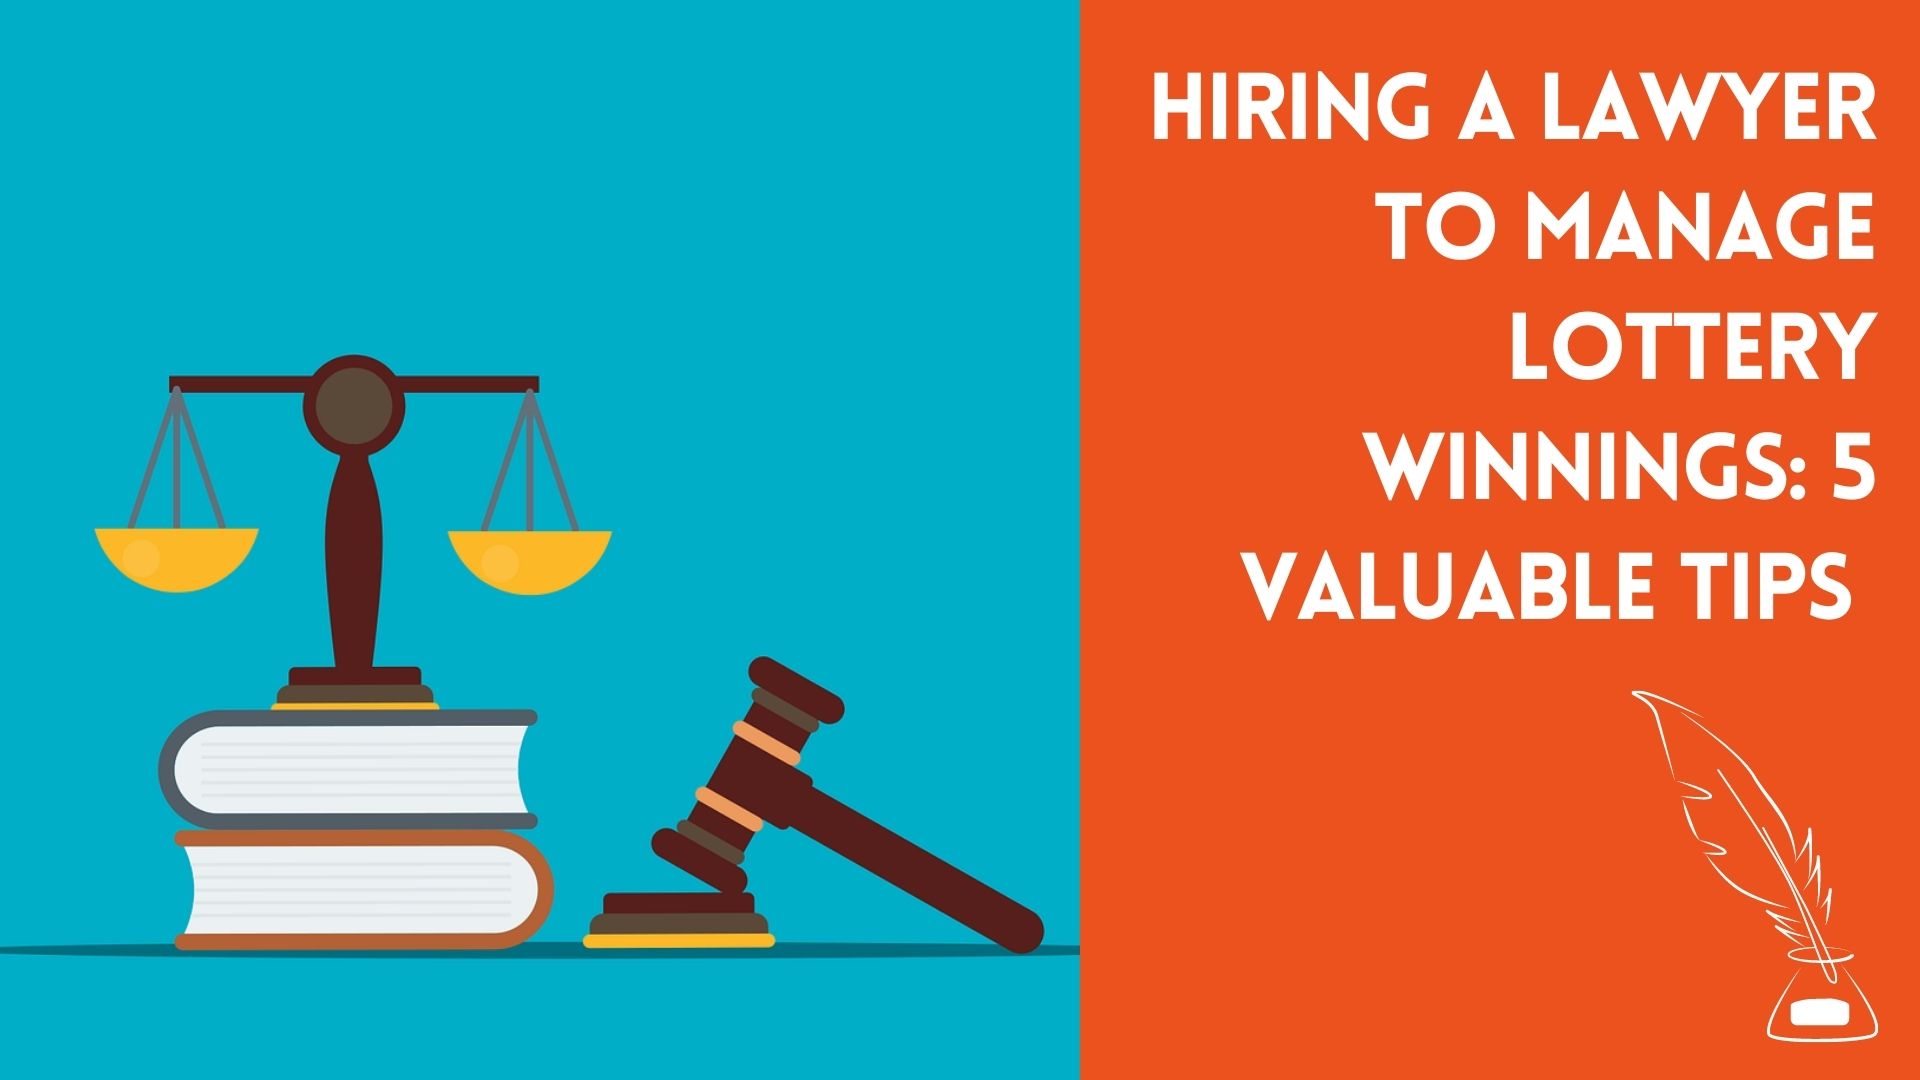 Hiring a Lawyer to Manage Lottery Winnings: 5 Valuable Tips